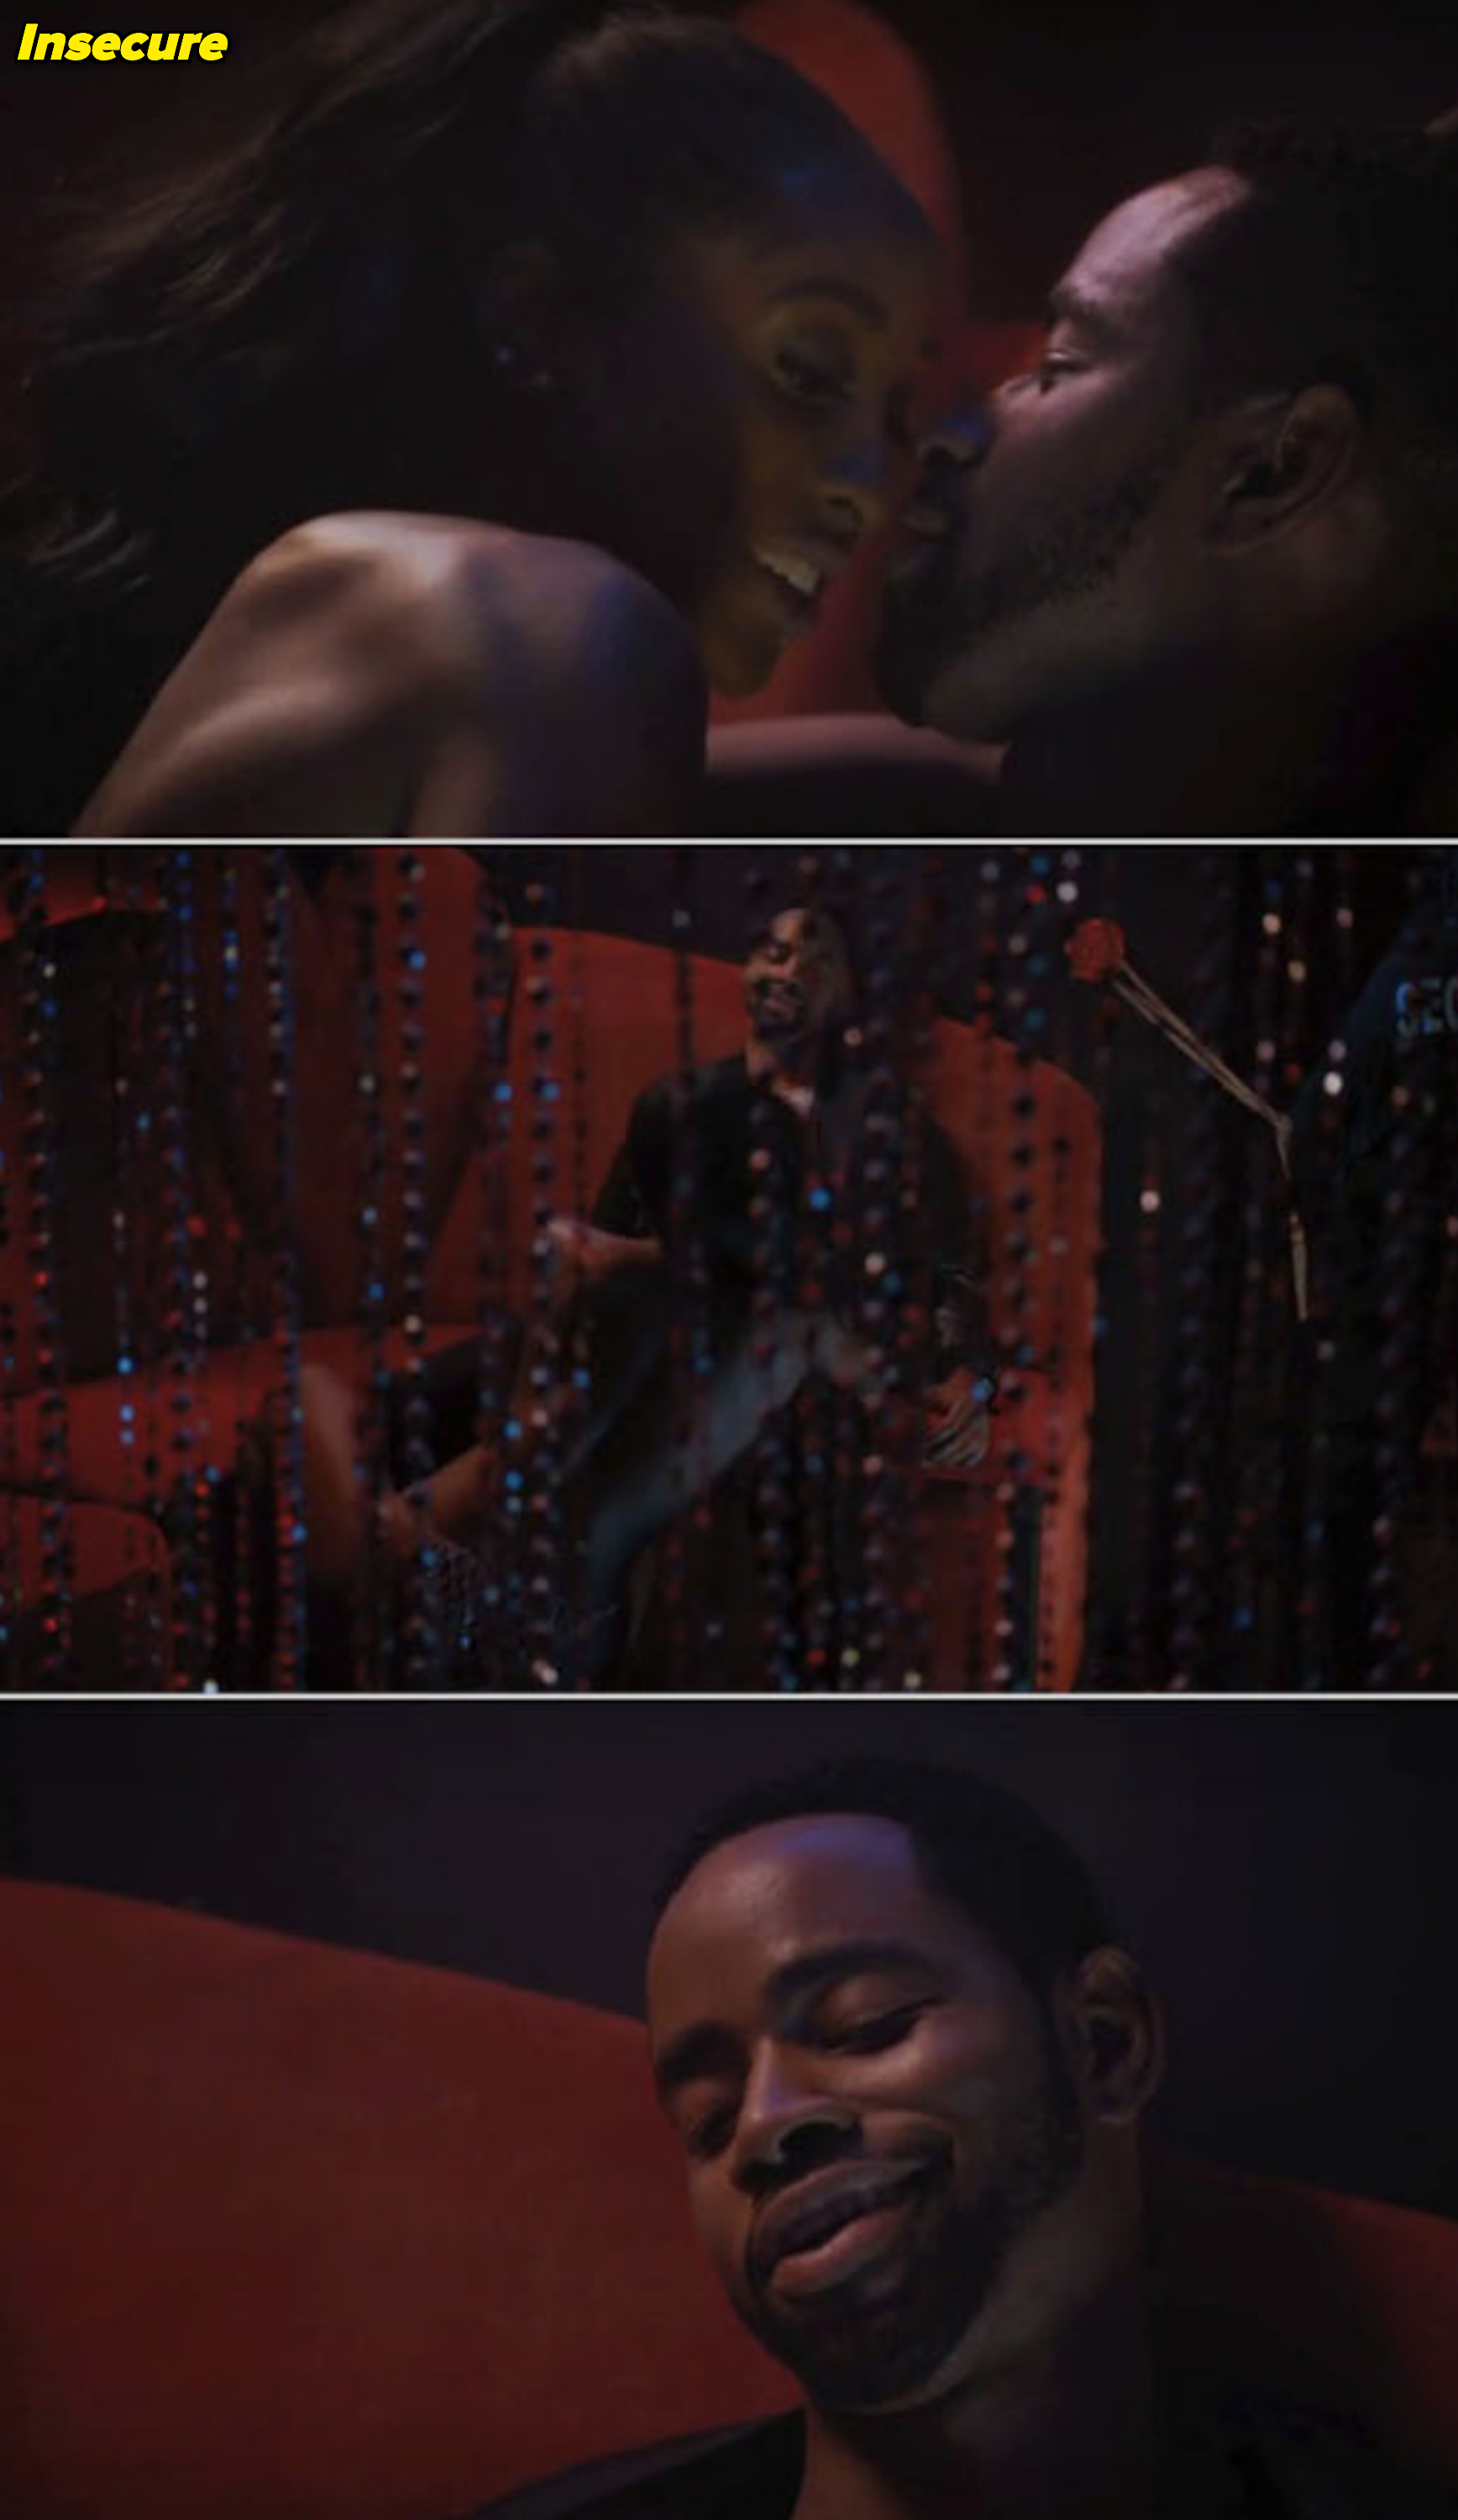 Jay Ellis&#x27; character from &quot;Insecure&quot; hooking up with someone at a strip club